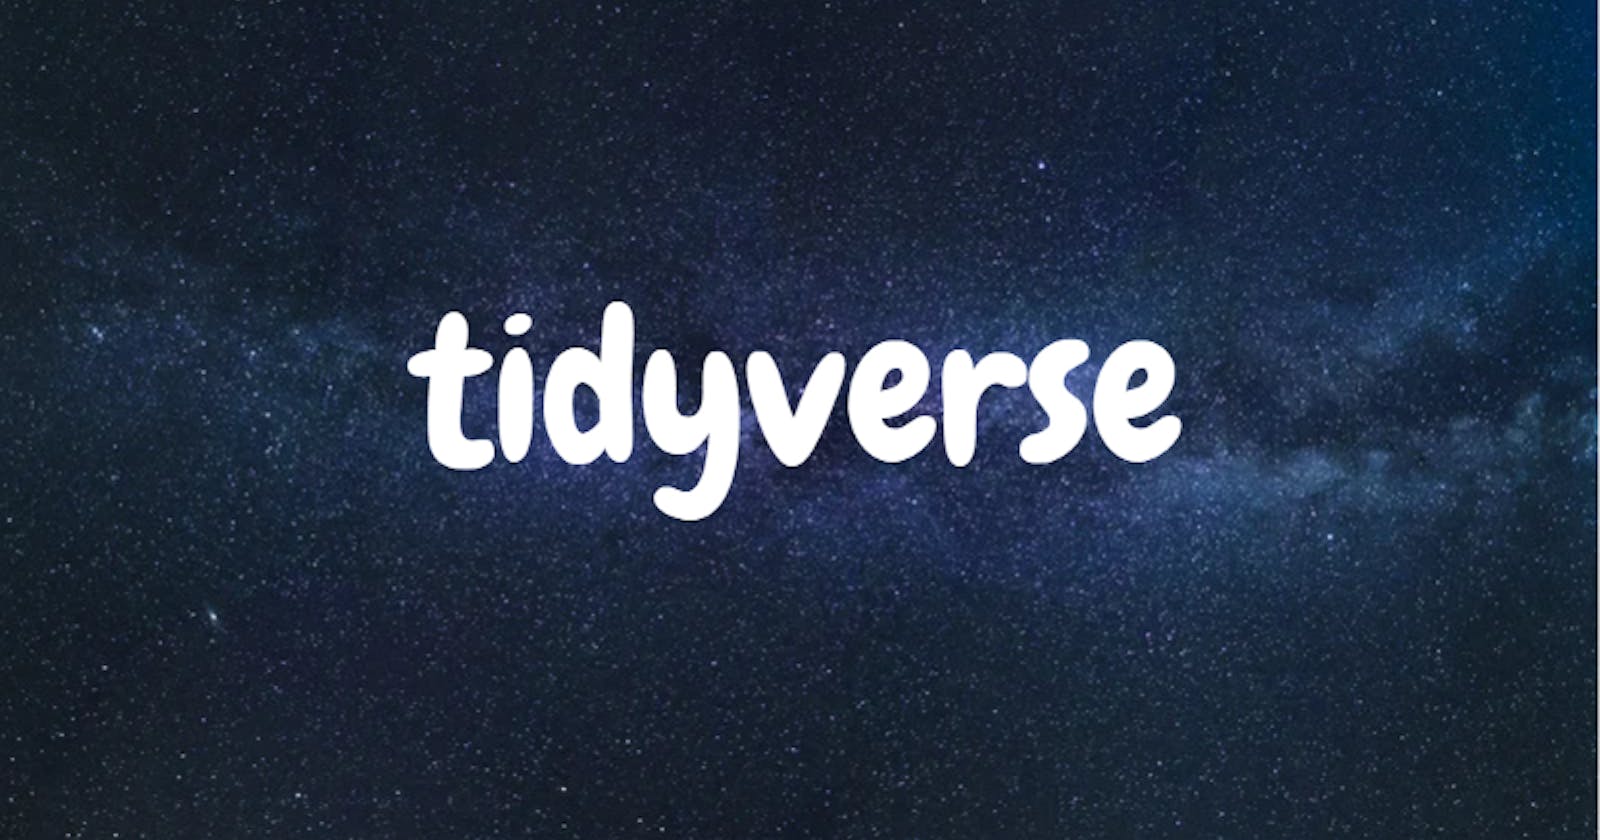 Tidyverse: A little universe for Analysts